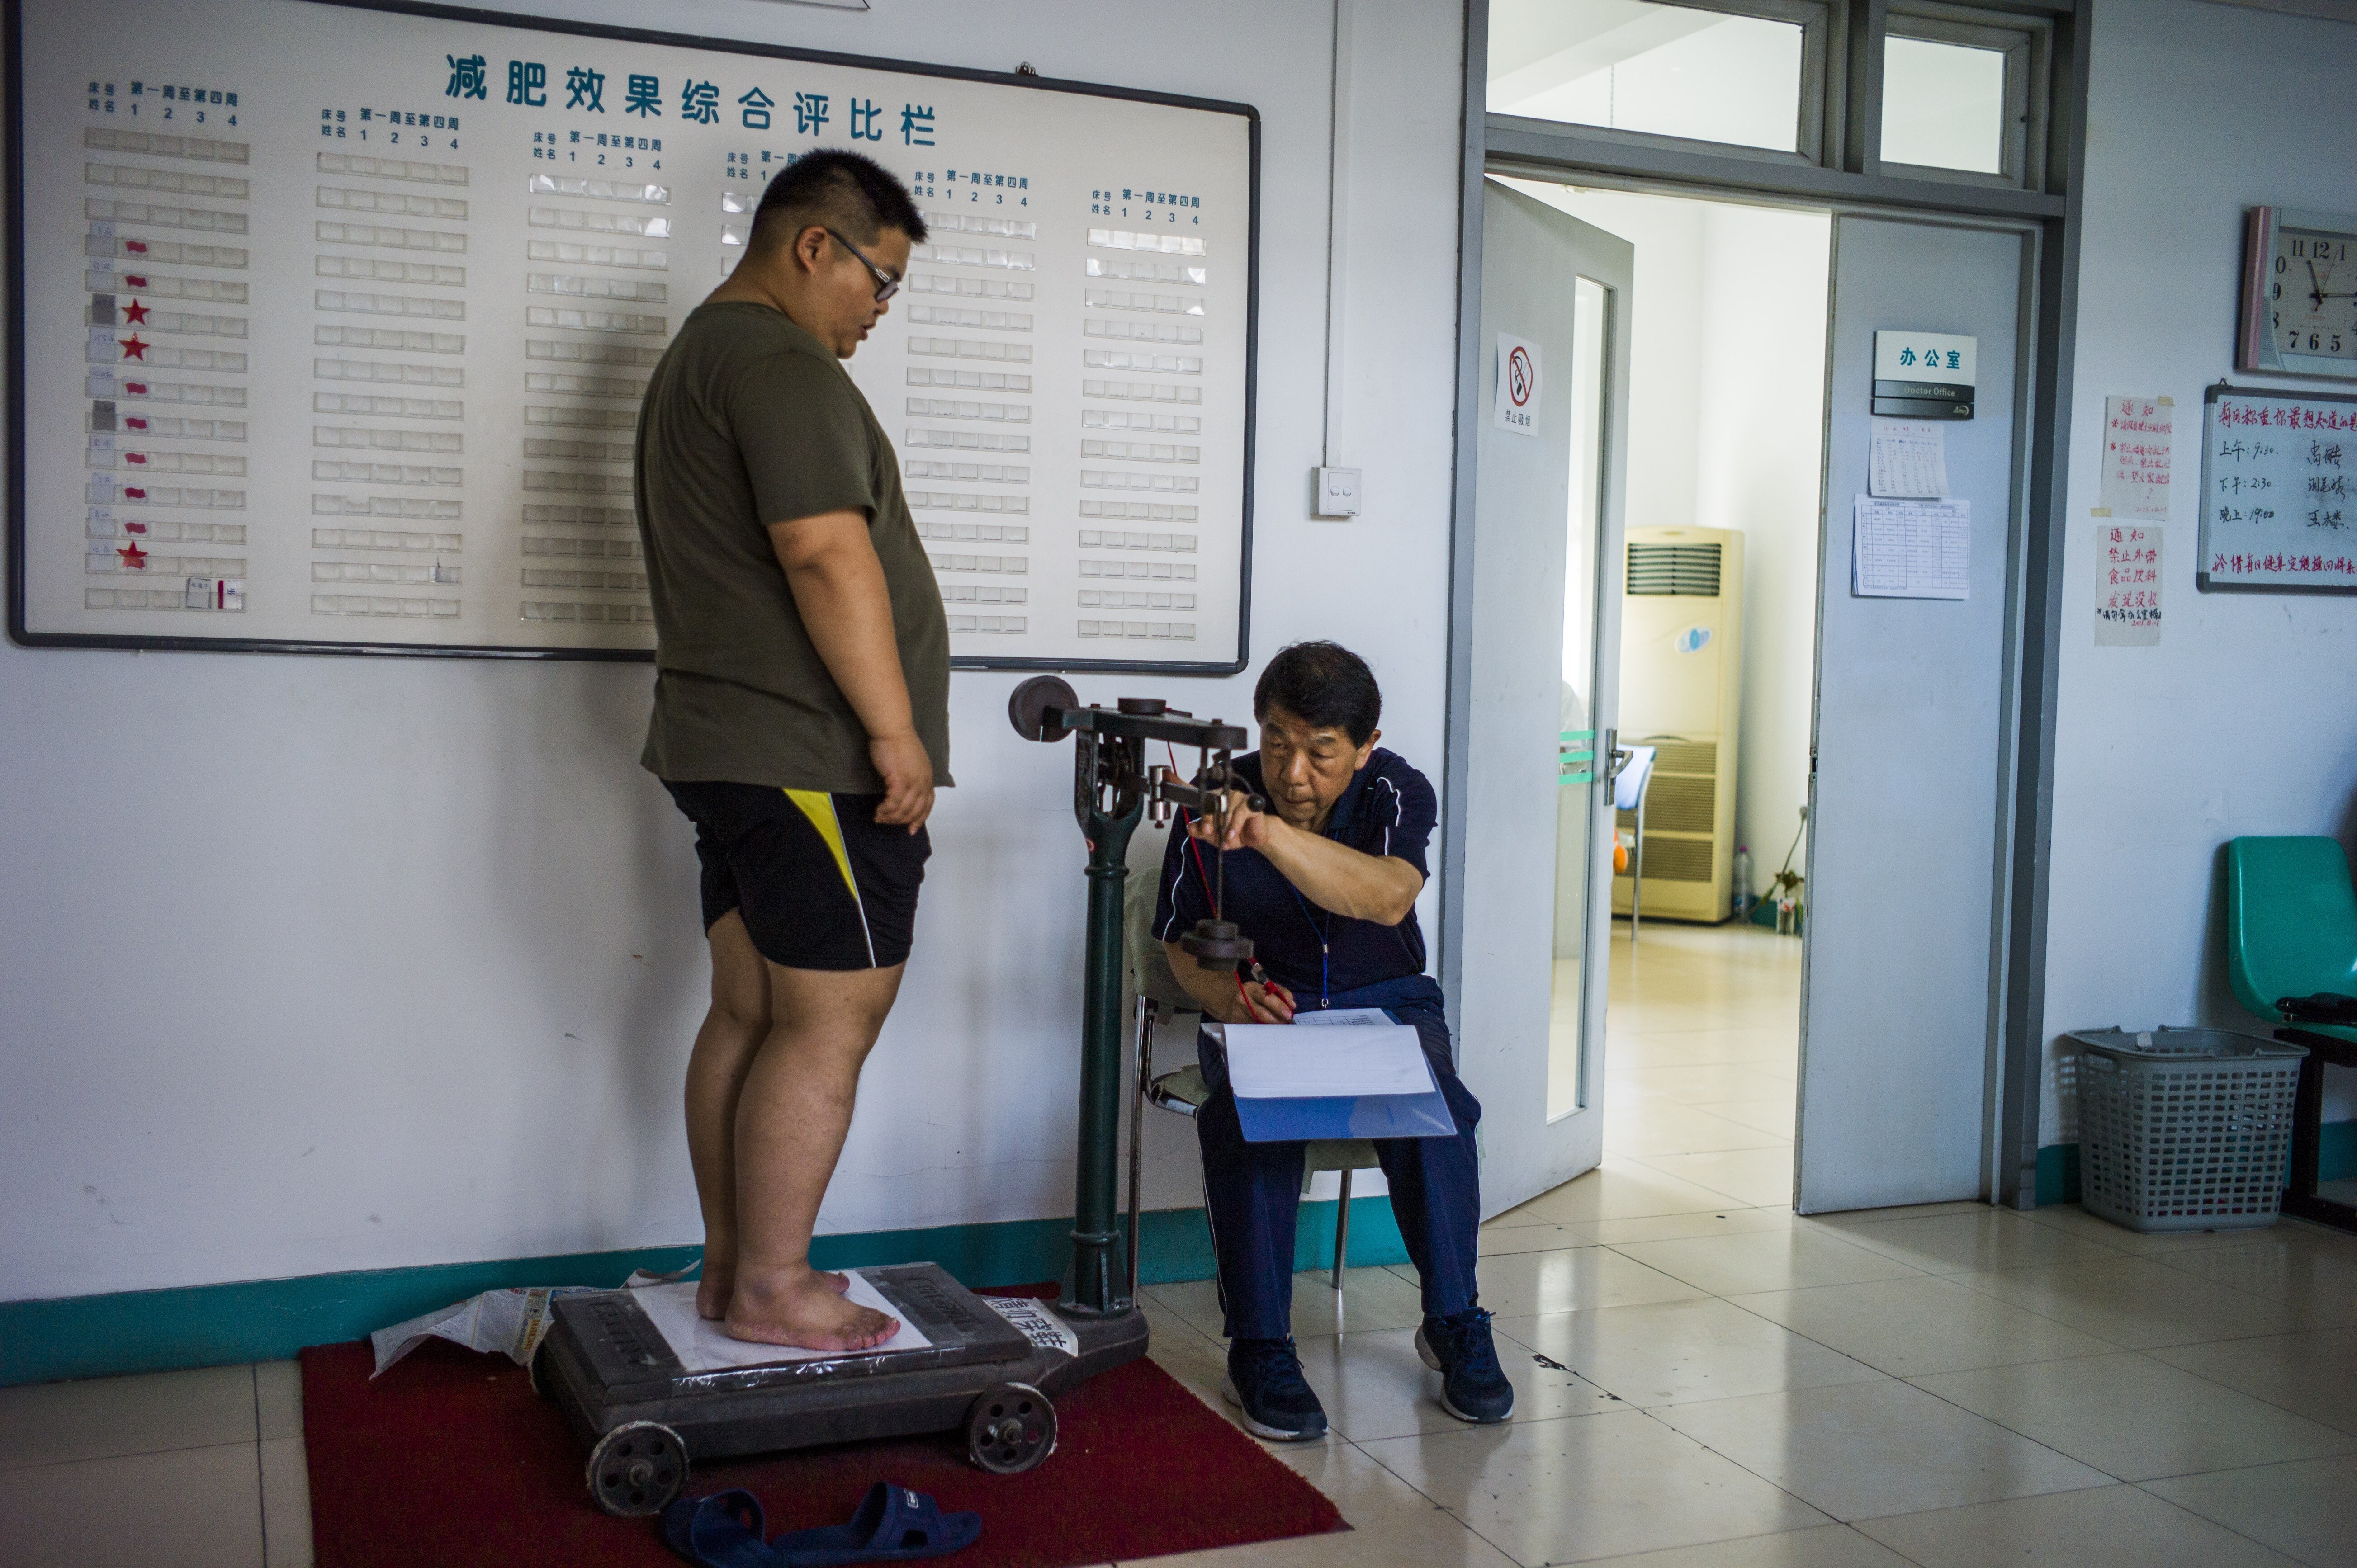 About 19 per cent of adolescents between the ages of six and 17 in China are overweight or obese, according to a new study. Photo: AFP